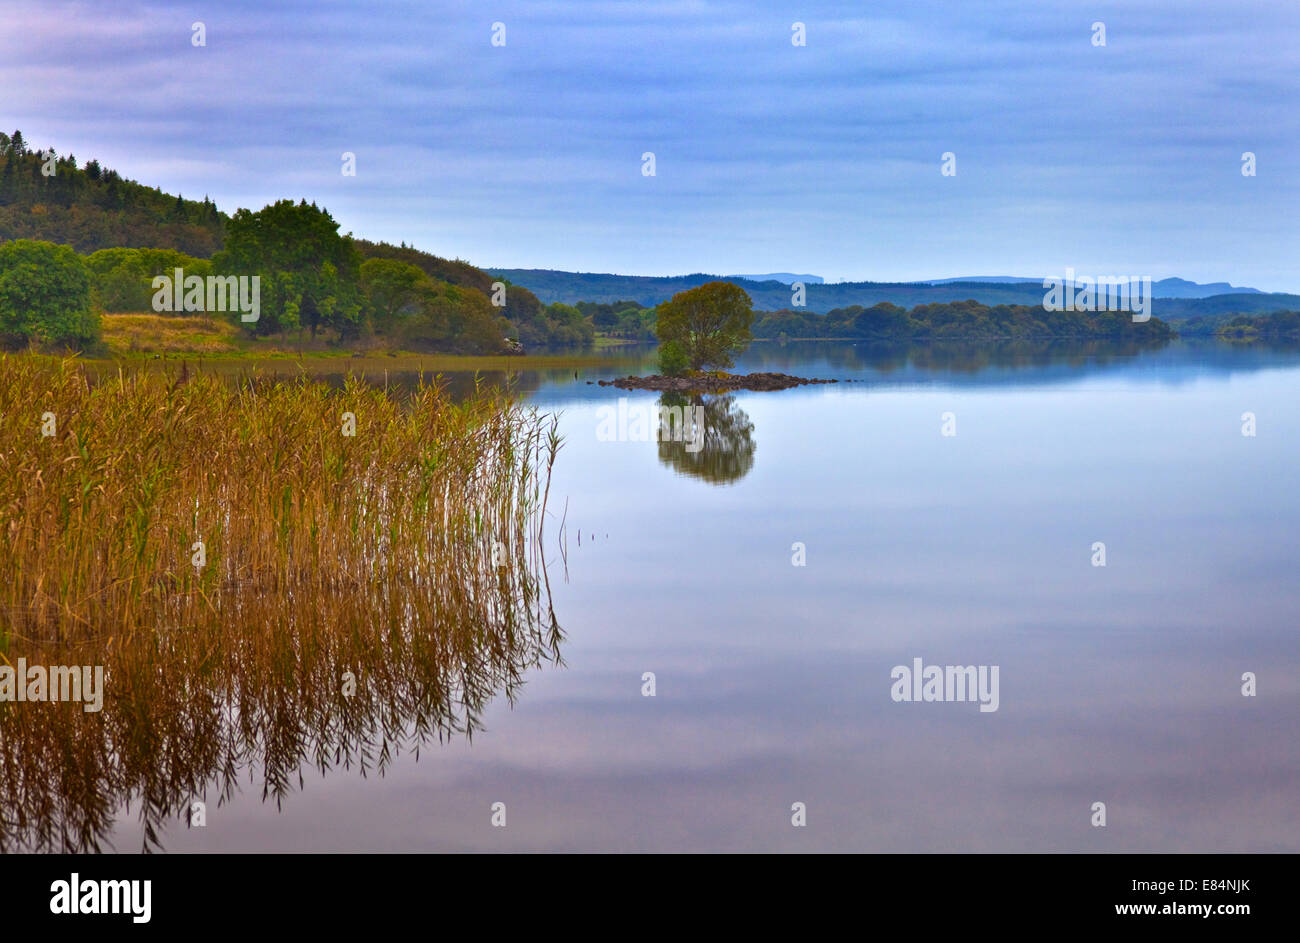 Reeds and an islet in Lough MacNean, County Fermanagh, Northern Ireland Stock Photo